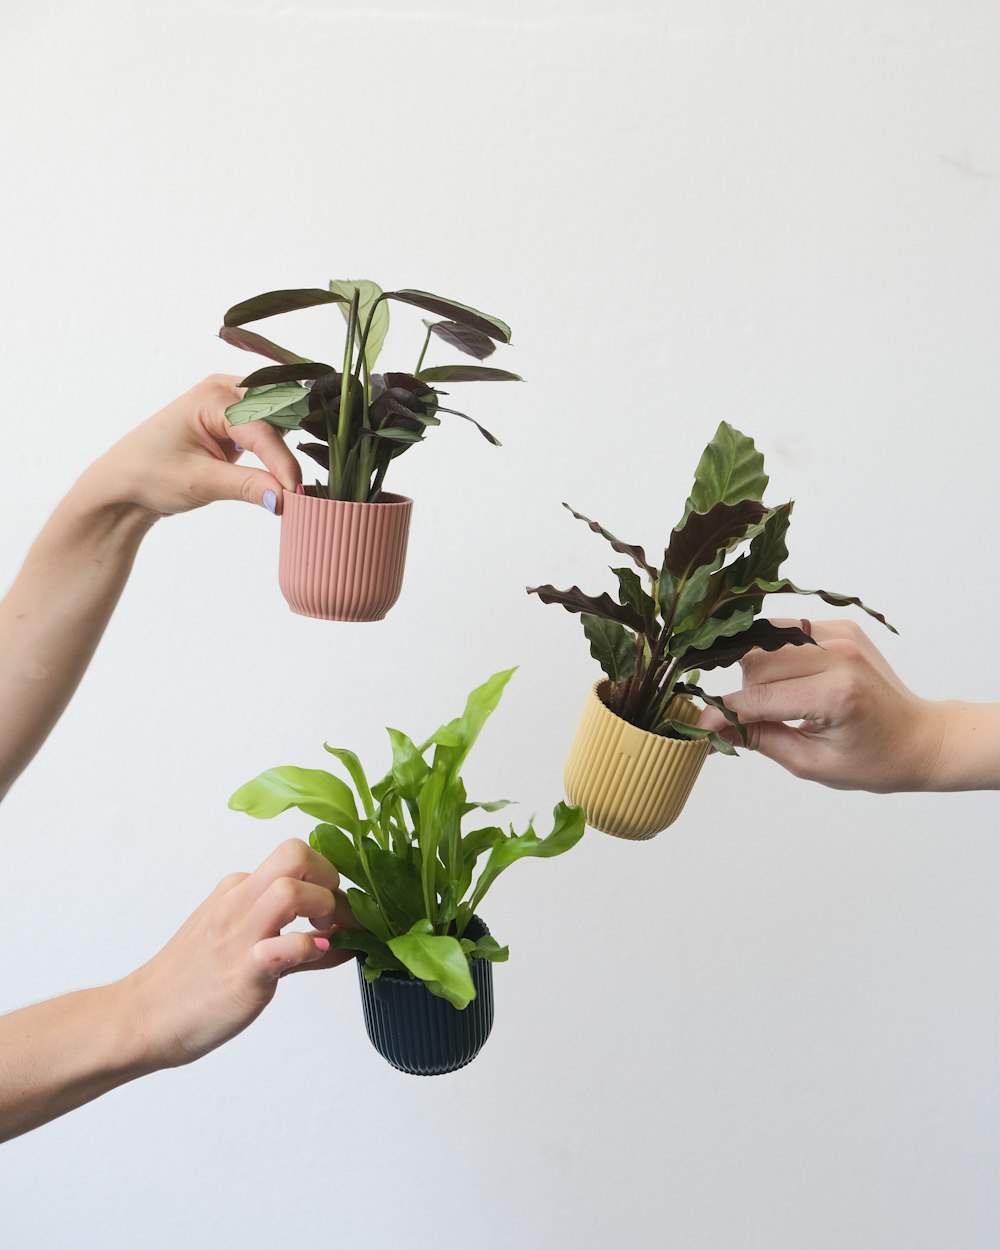 hands holding plants in pots